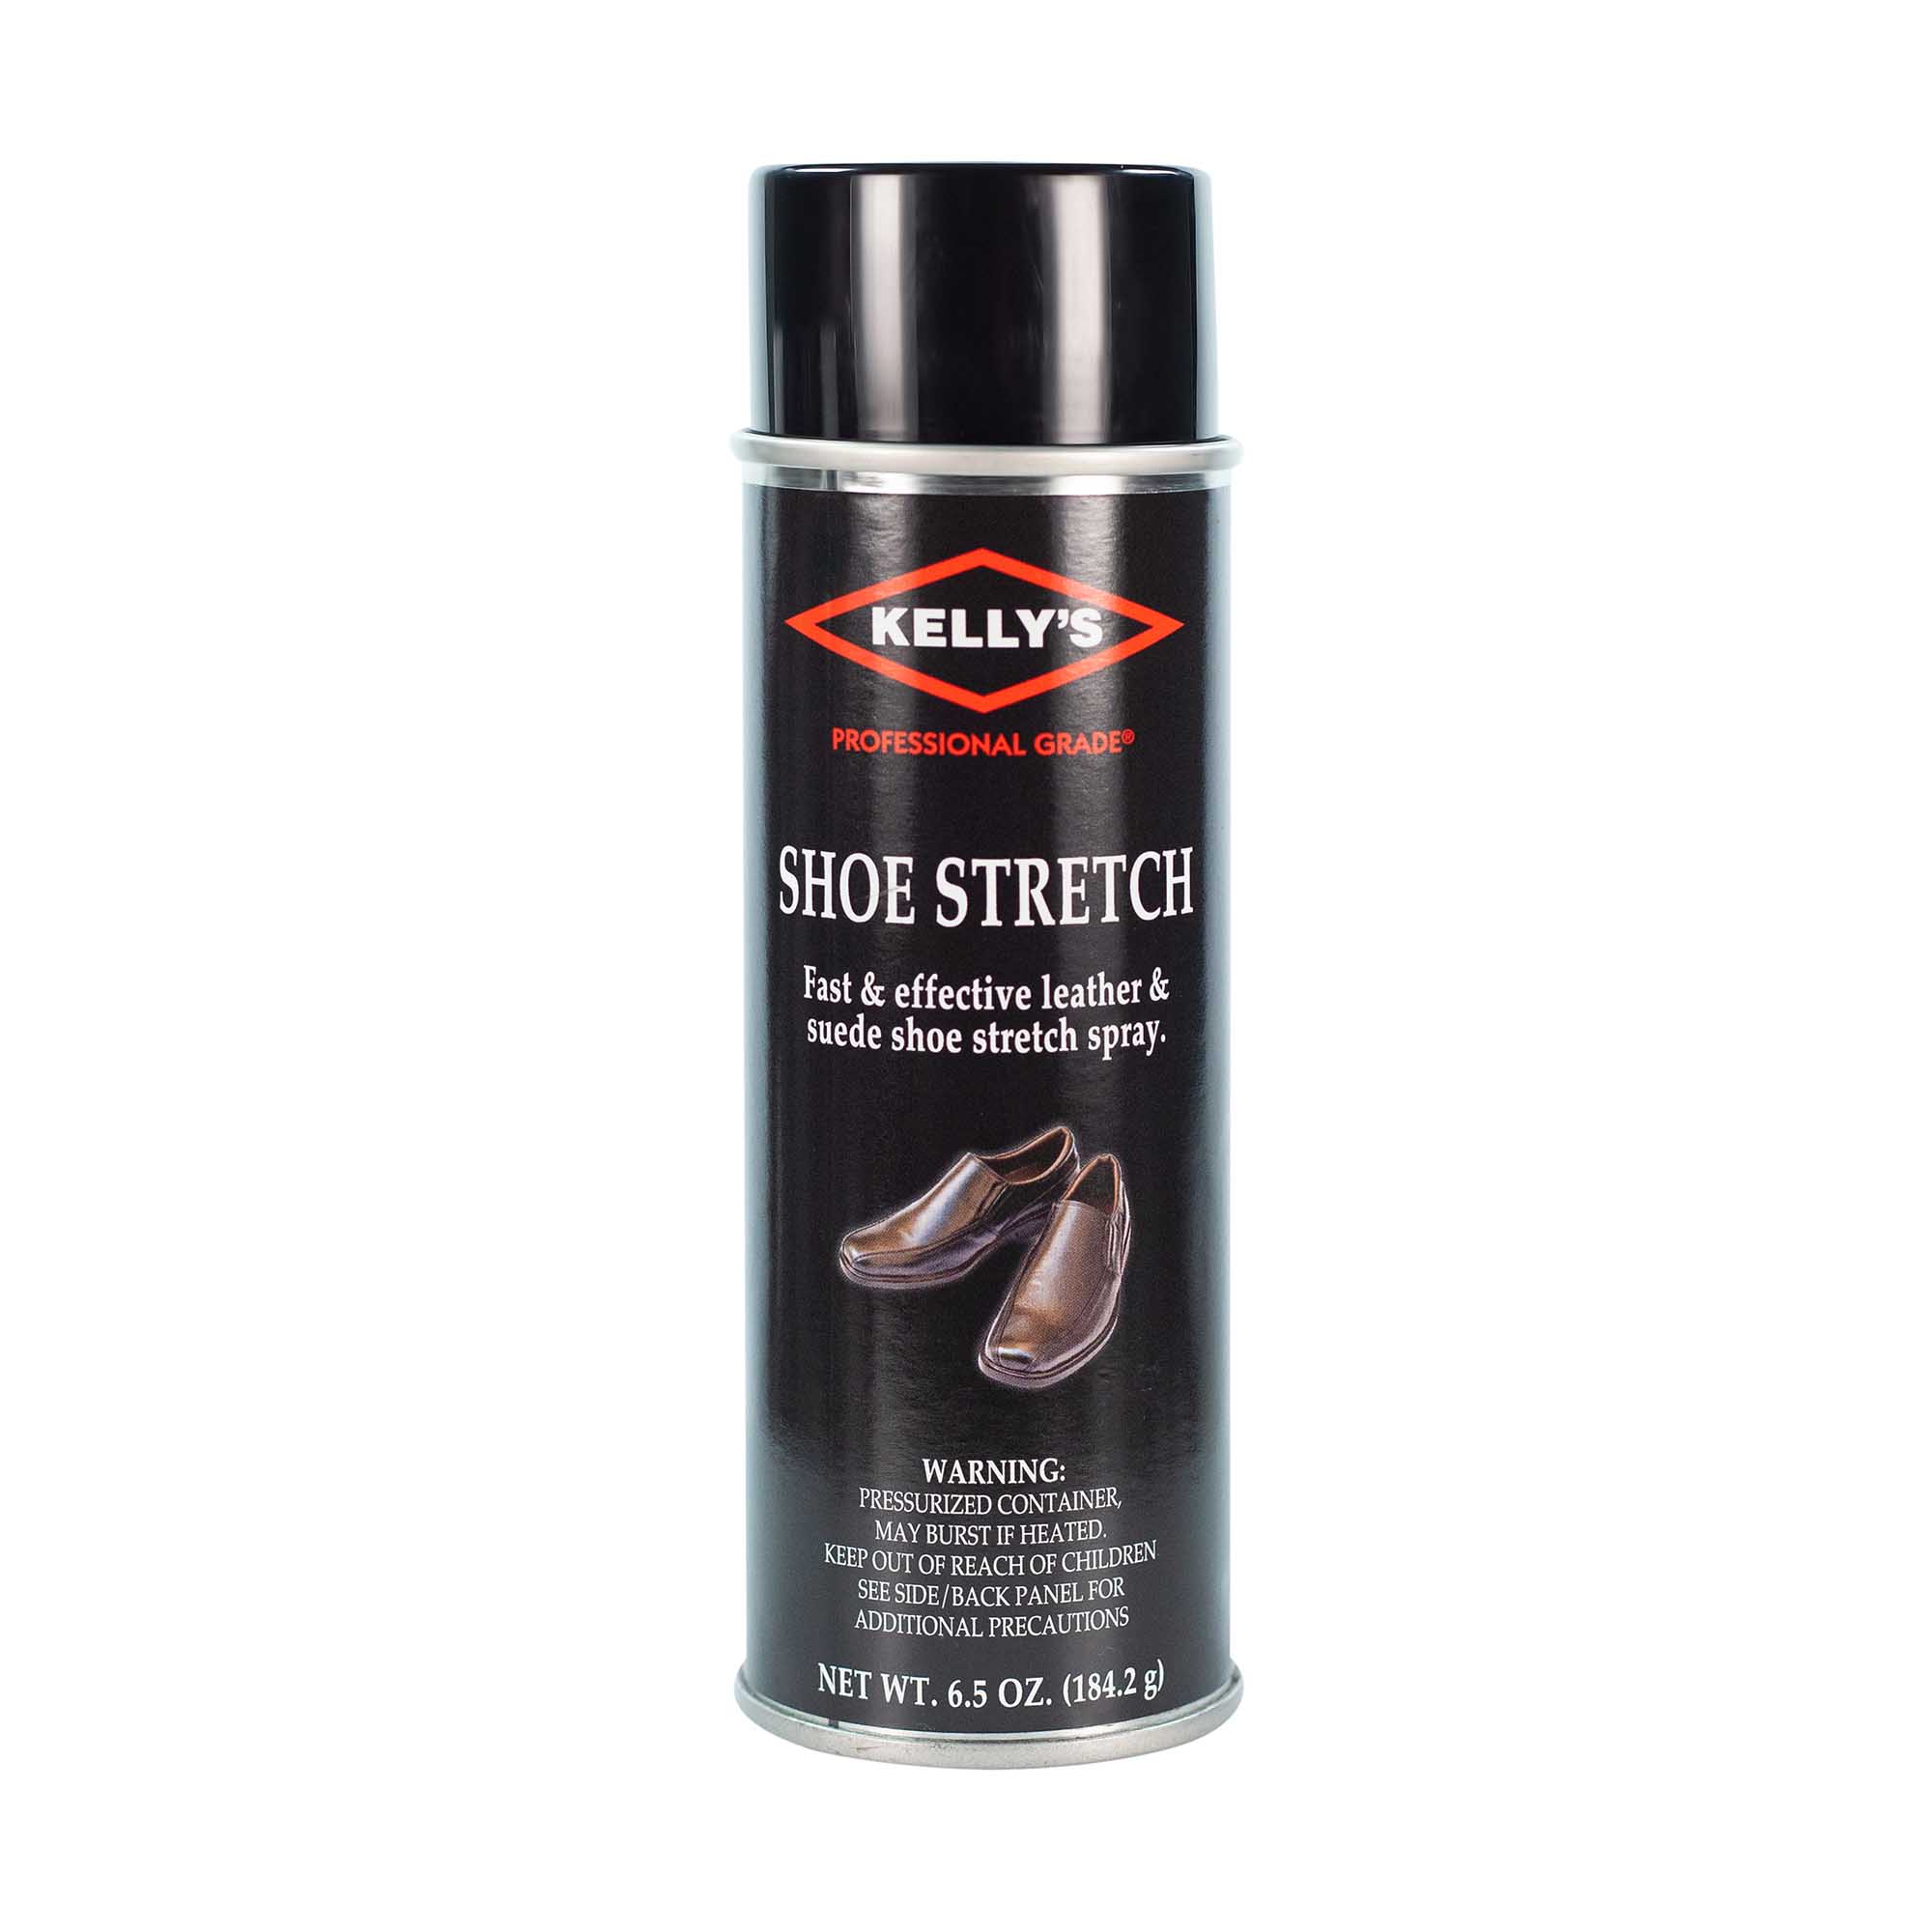 what is in shoe stretch spray